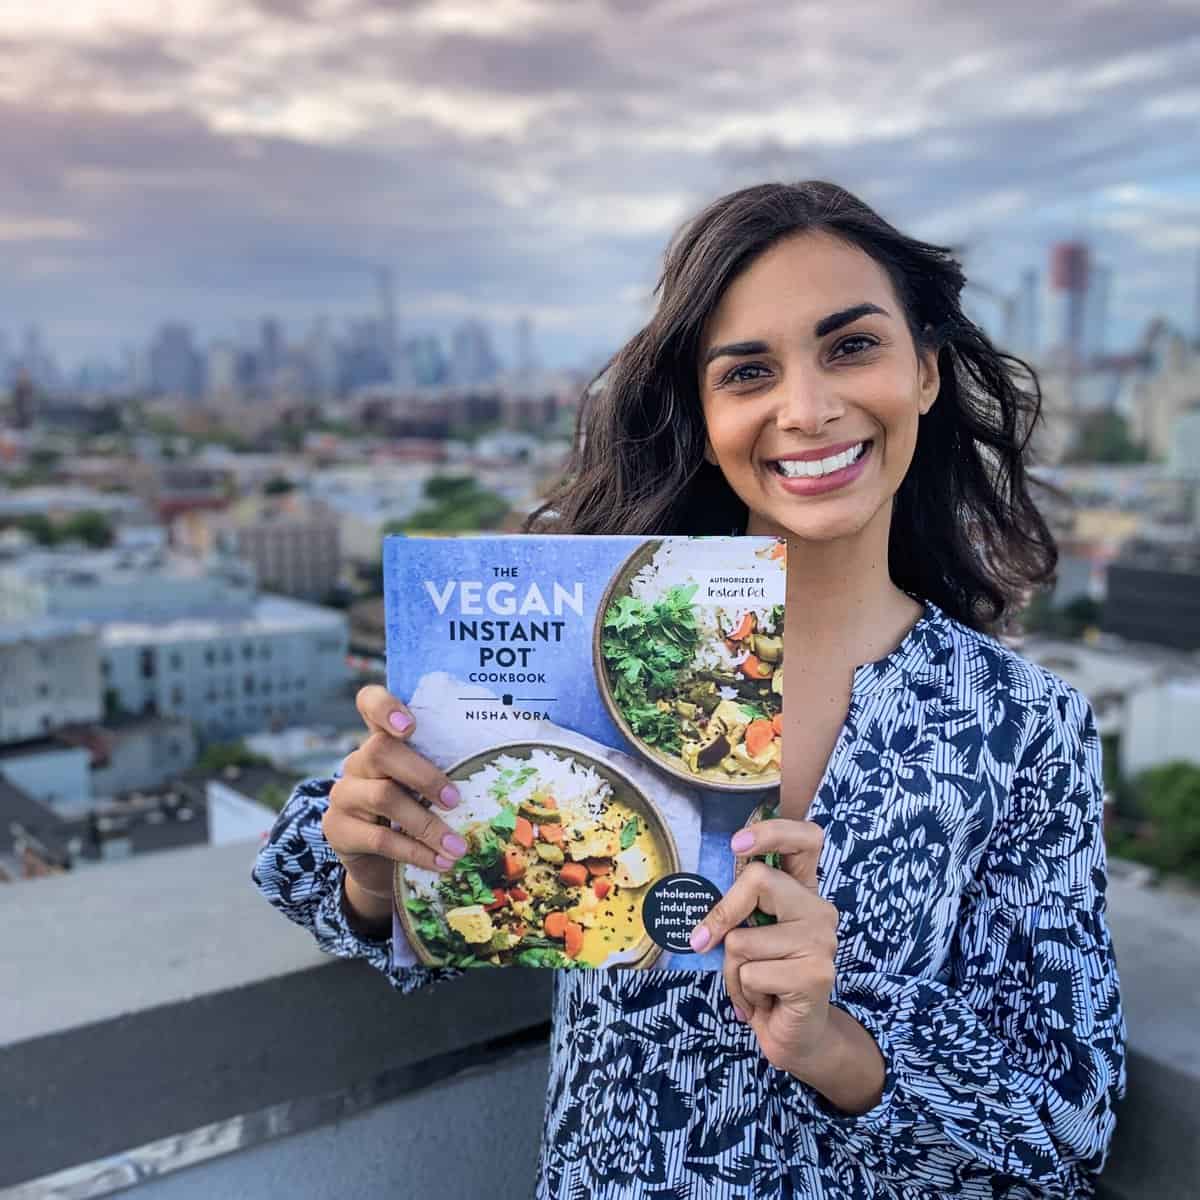 Nisha holding her instant pot cookbook in nyc